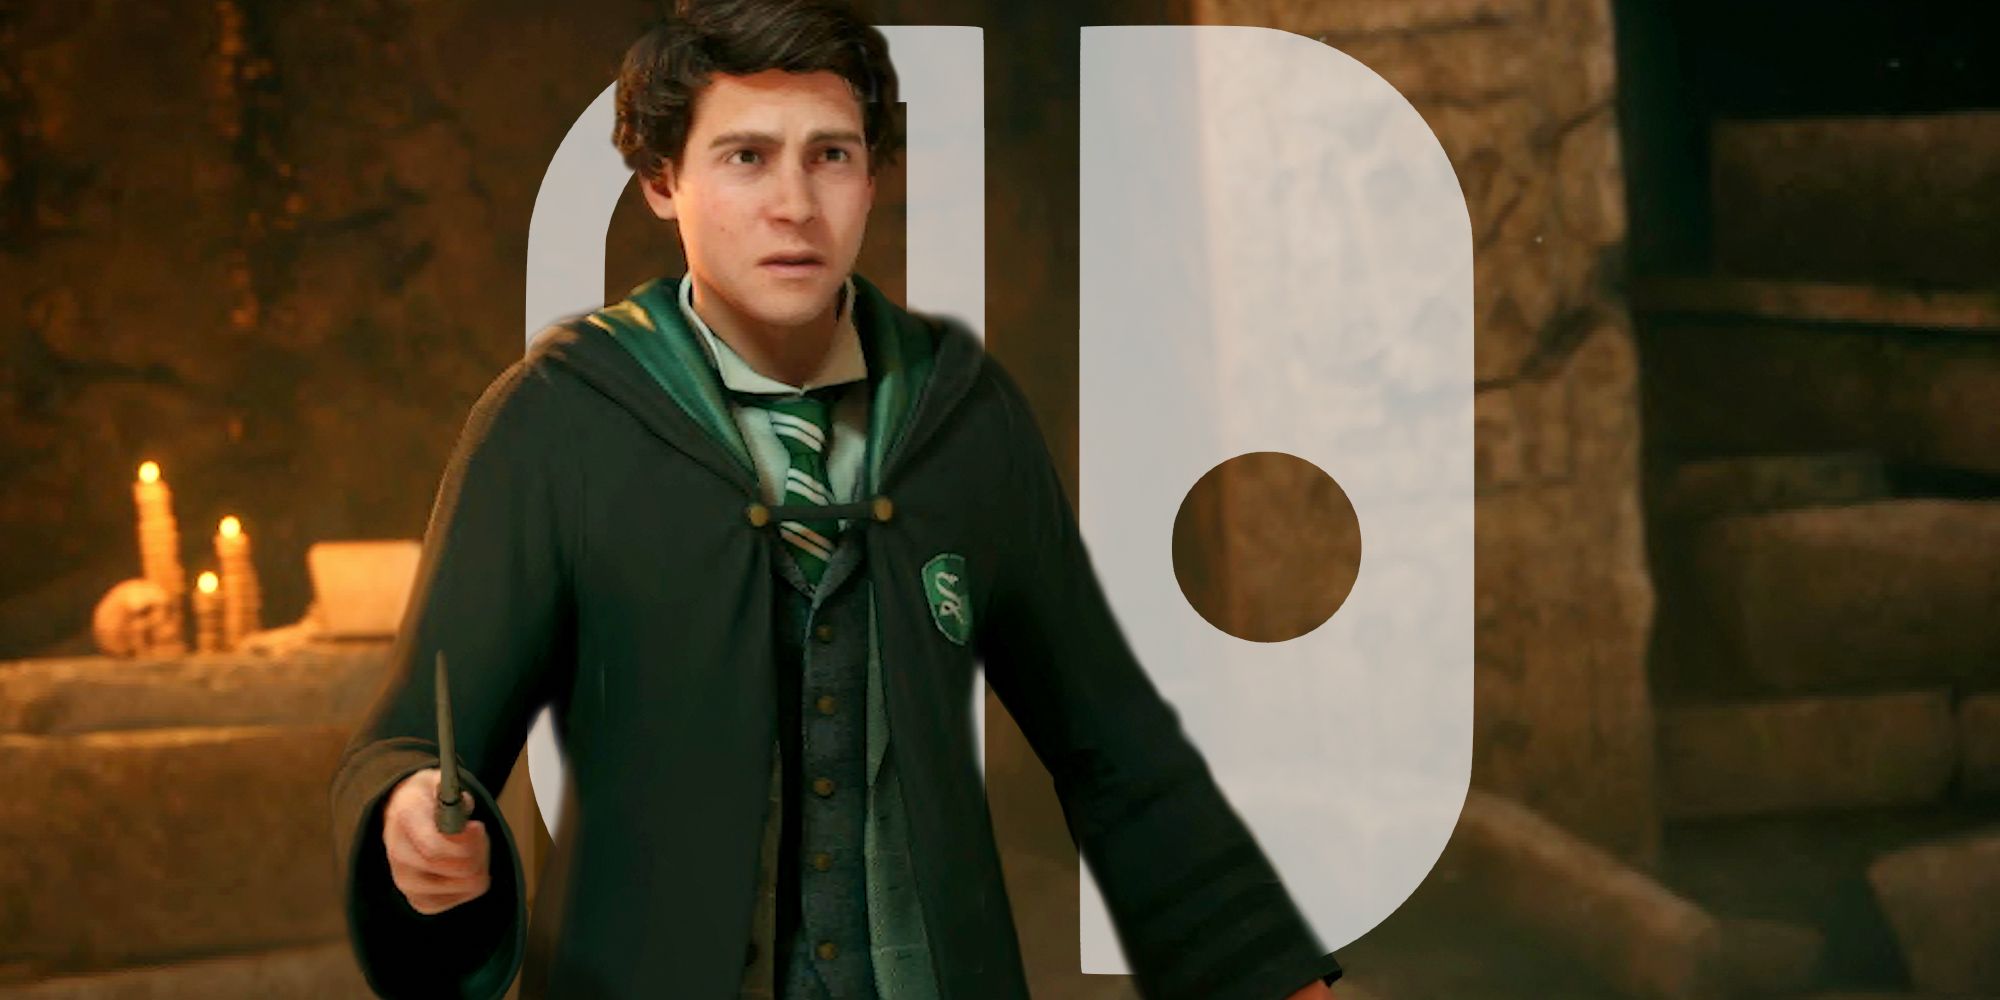 hogwarts legacy release date switch